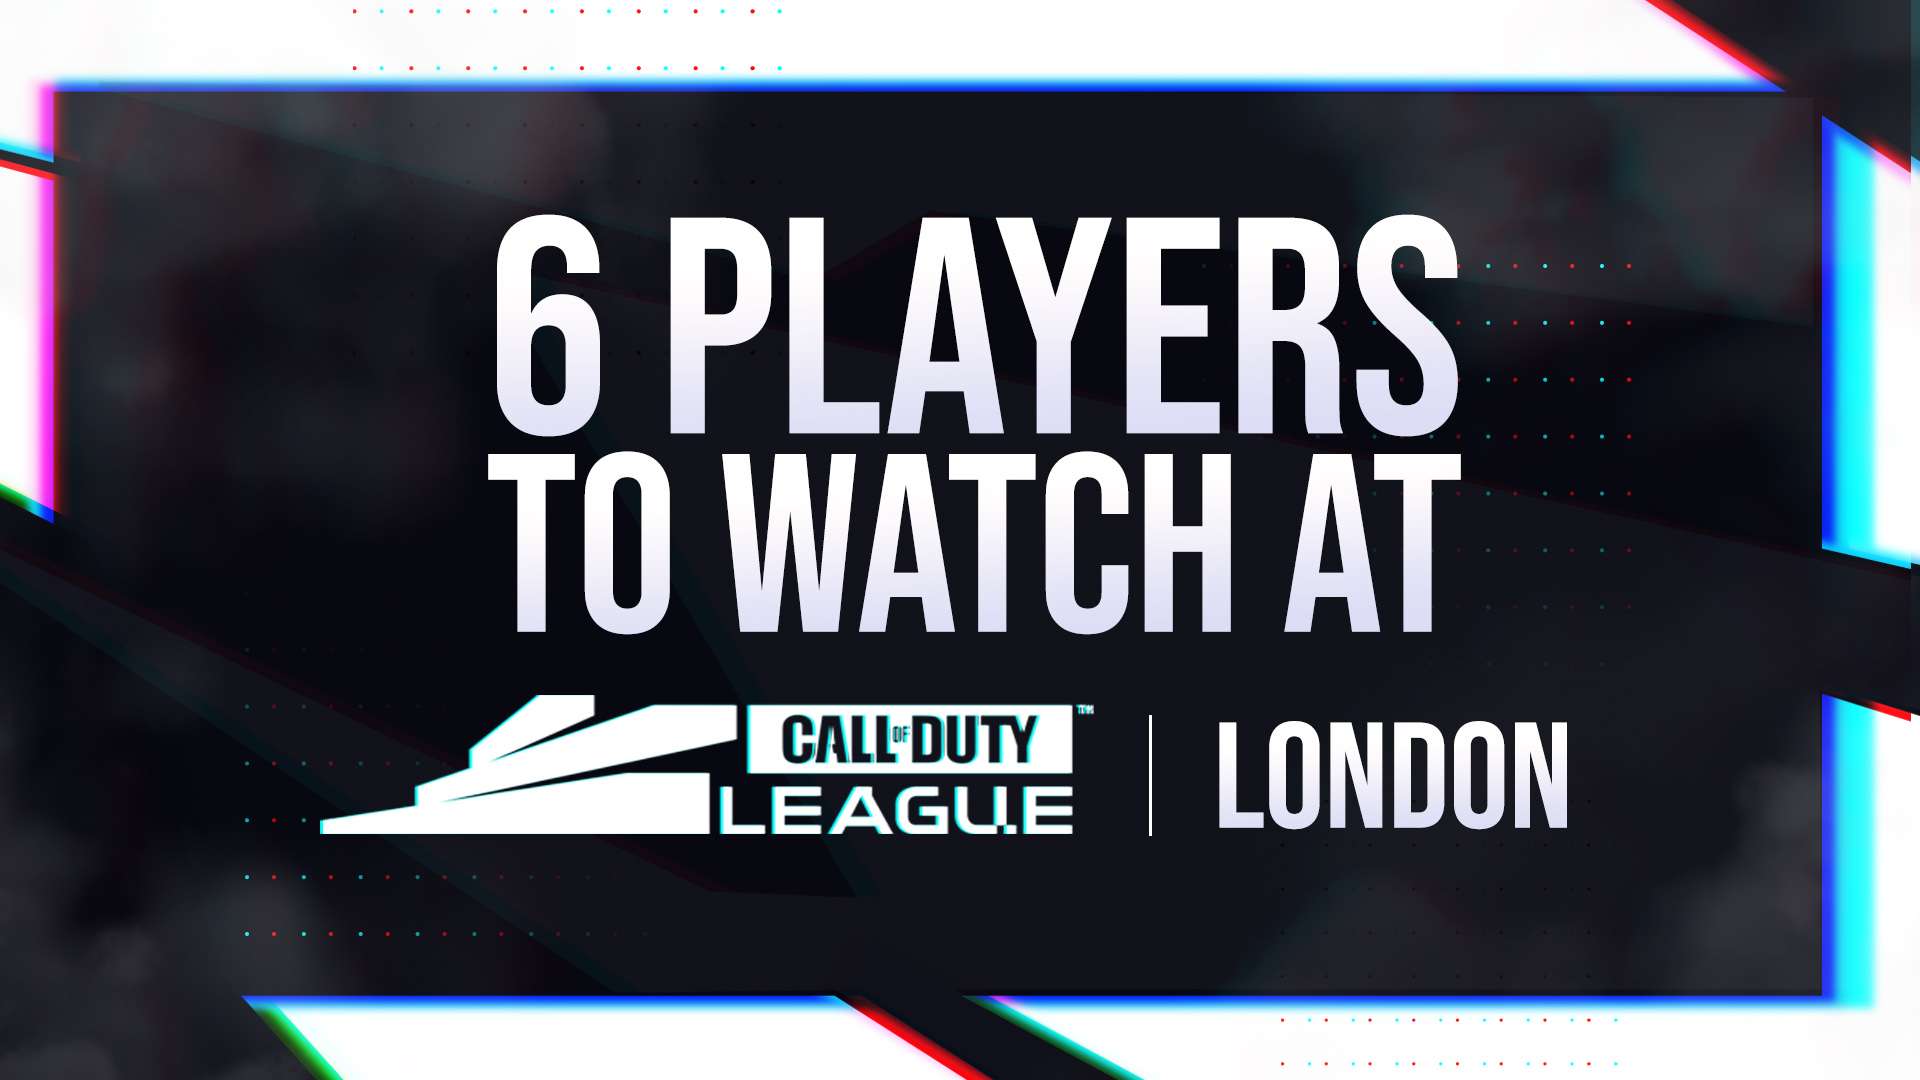 6 players to watch at CDL London